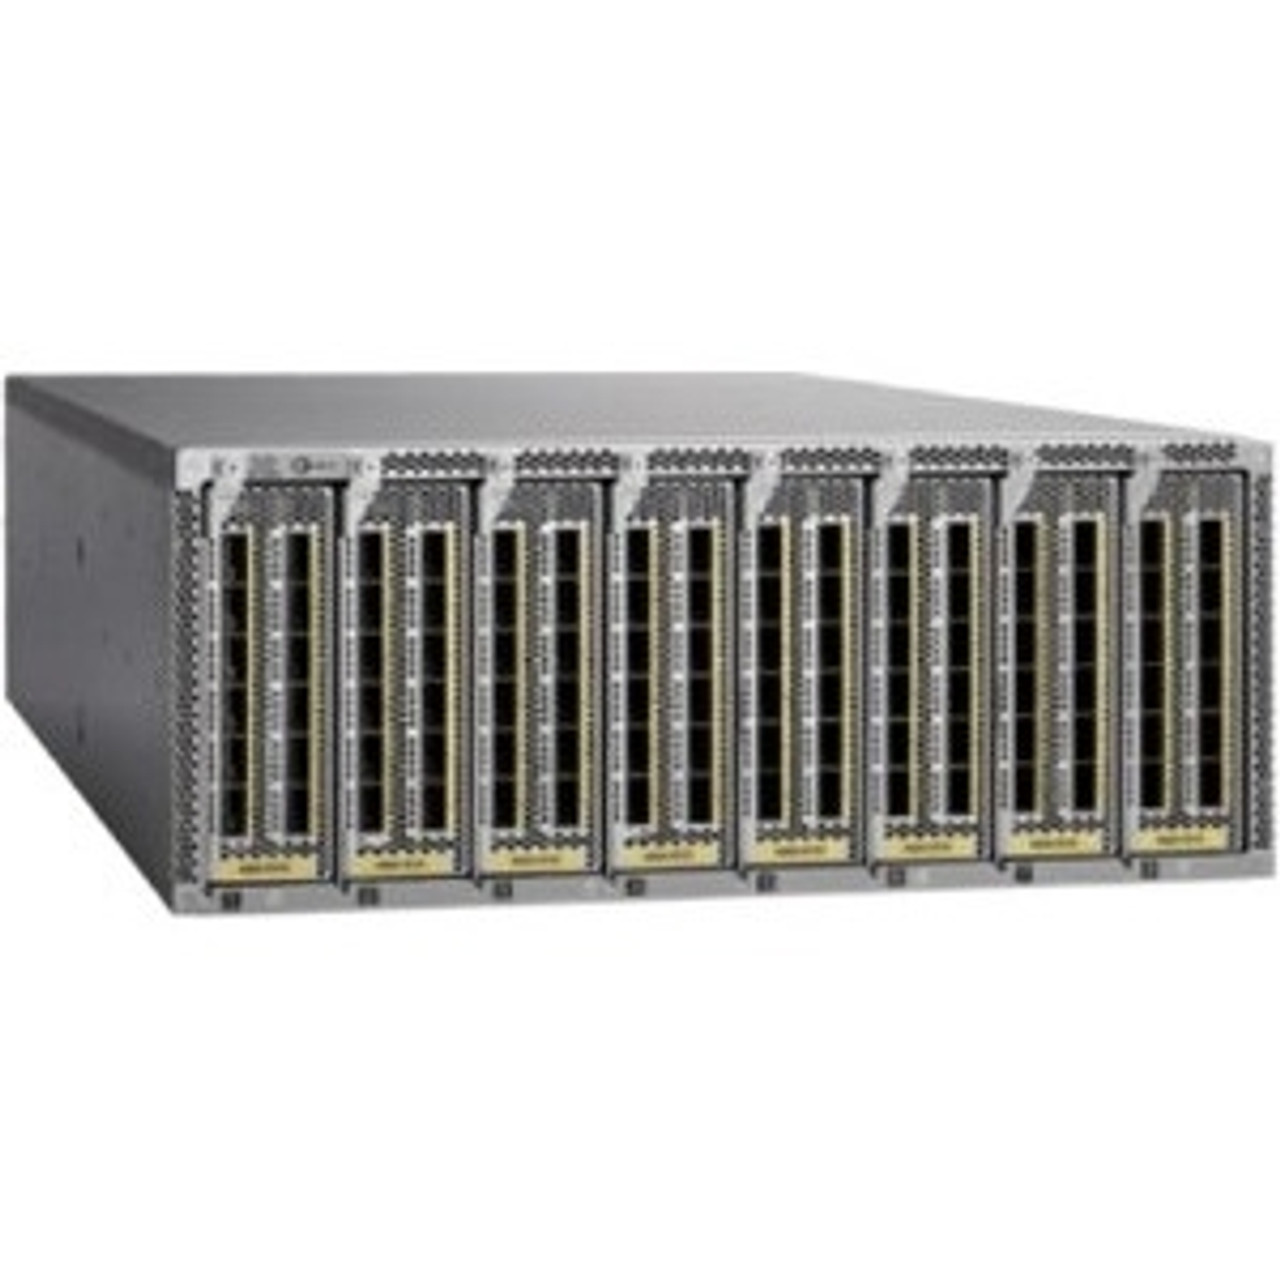 N6004EF-6FEX-10GT Cisco N6004 Chassis with 6x 10GT FEXes with FETs (Refurbished)